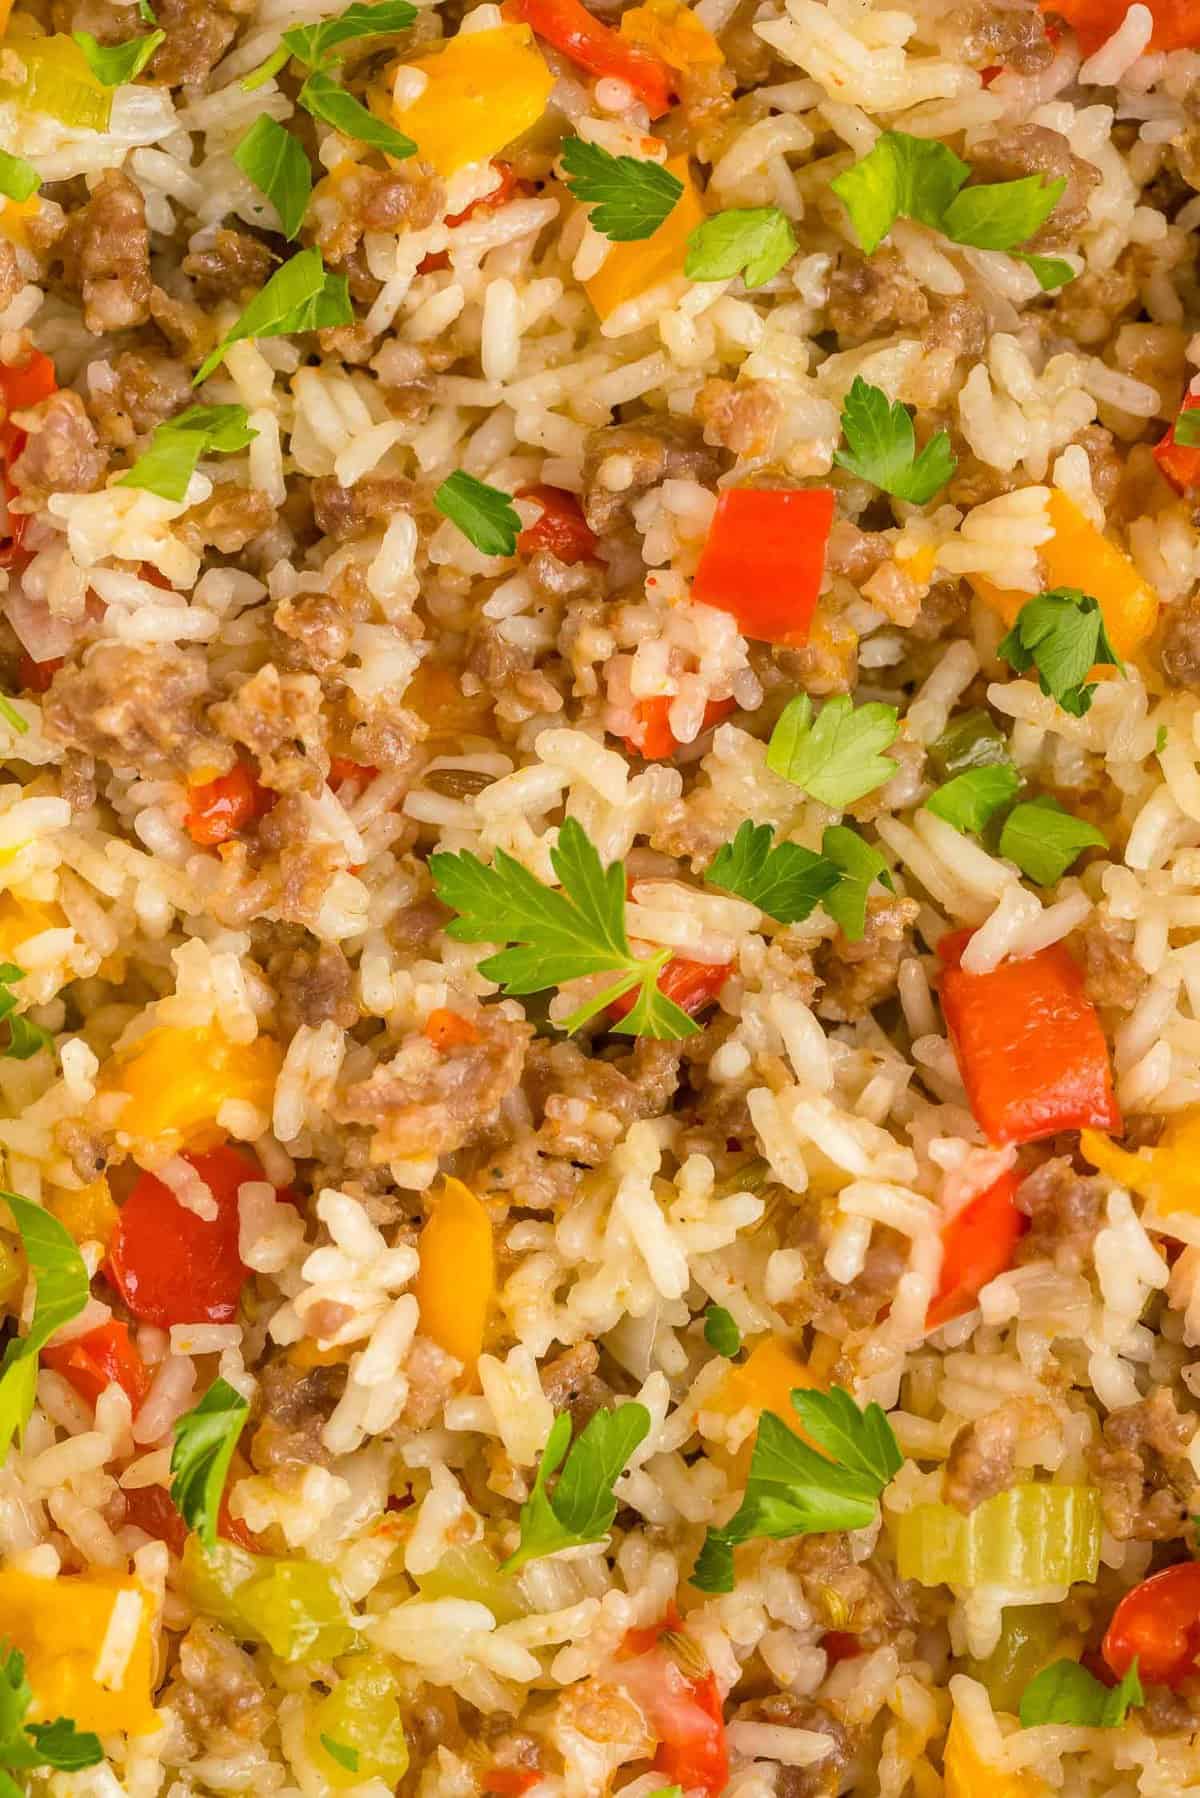 Close up of rice and vegetables, garnished with parsley.